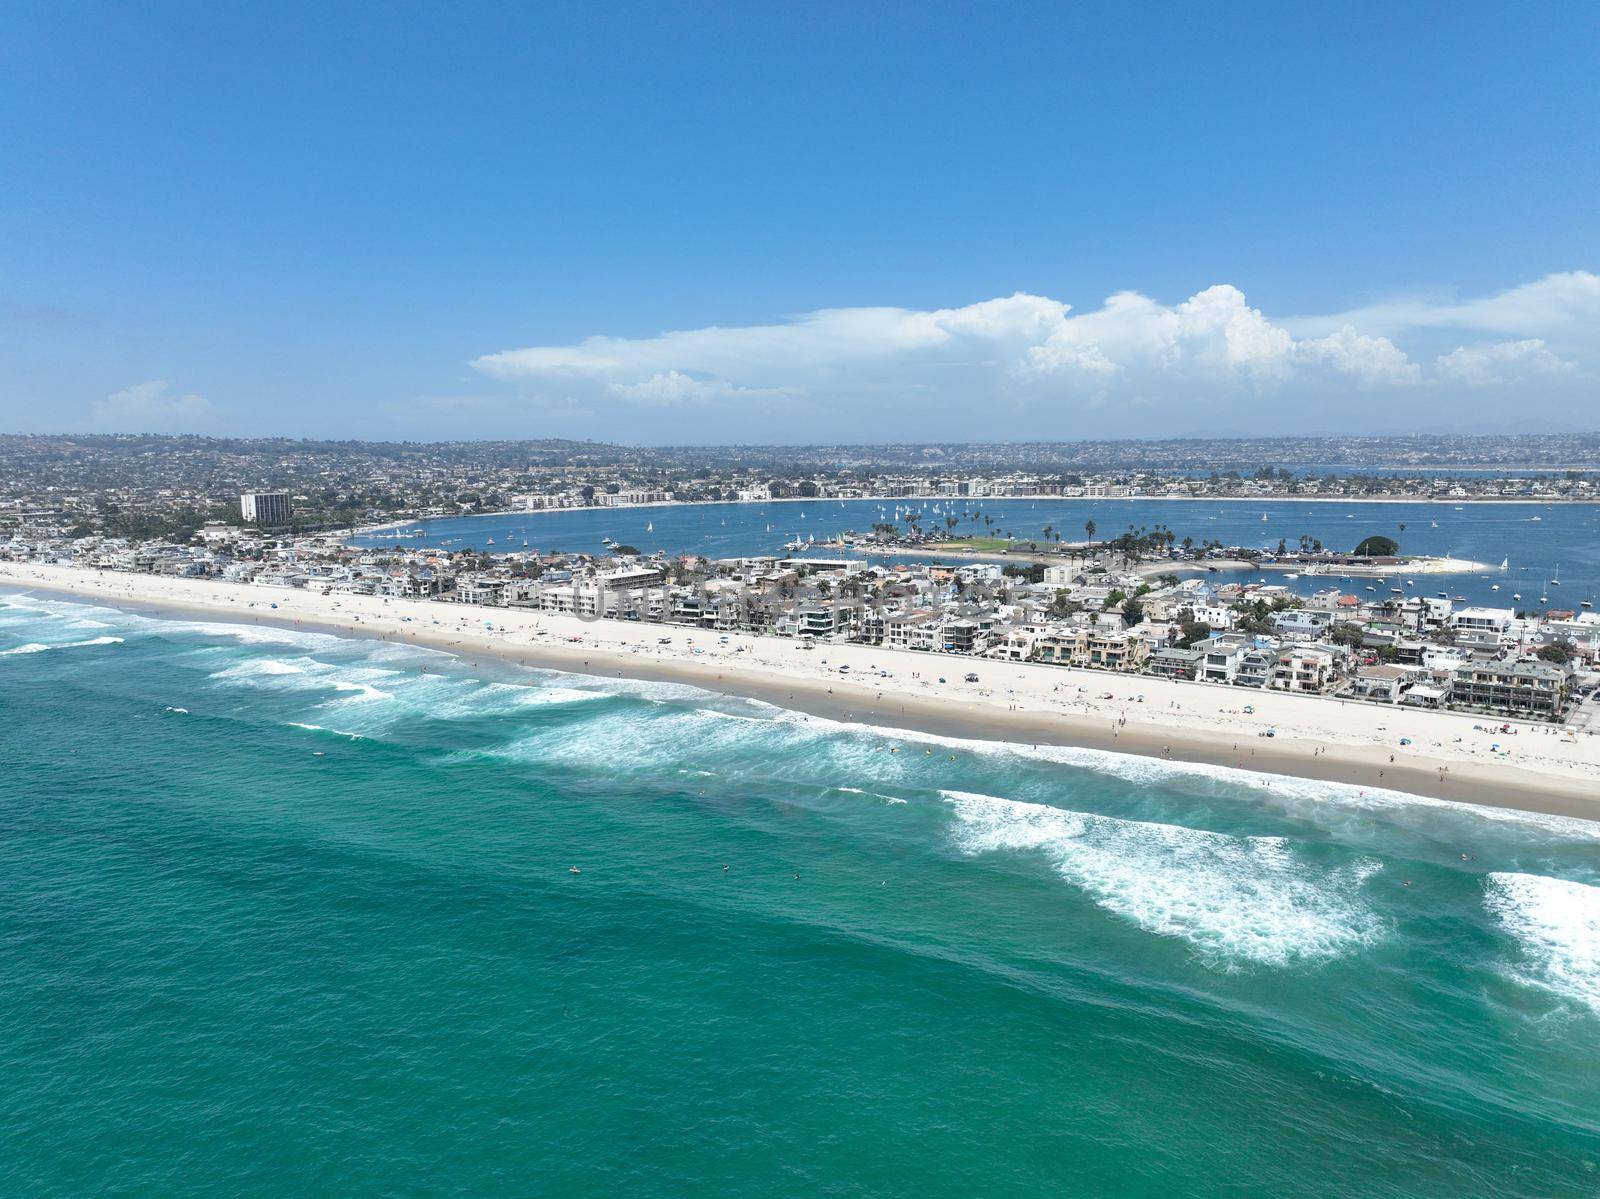 Aerial view of Mission Bay and beach in San Diego, California. USA. by Bonandbon